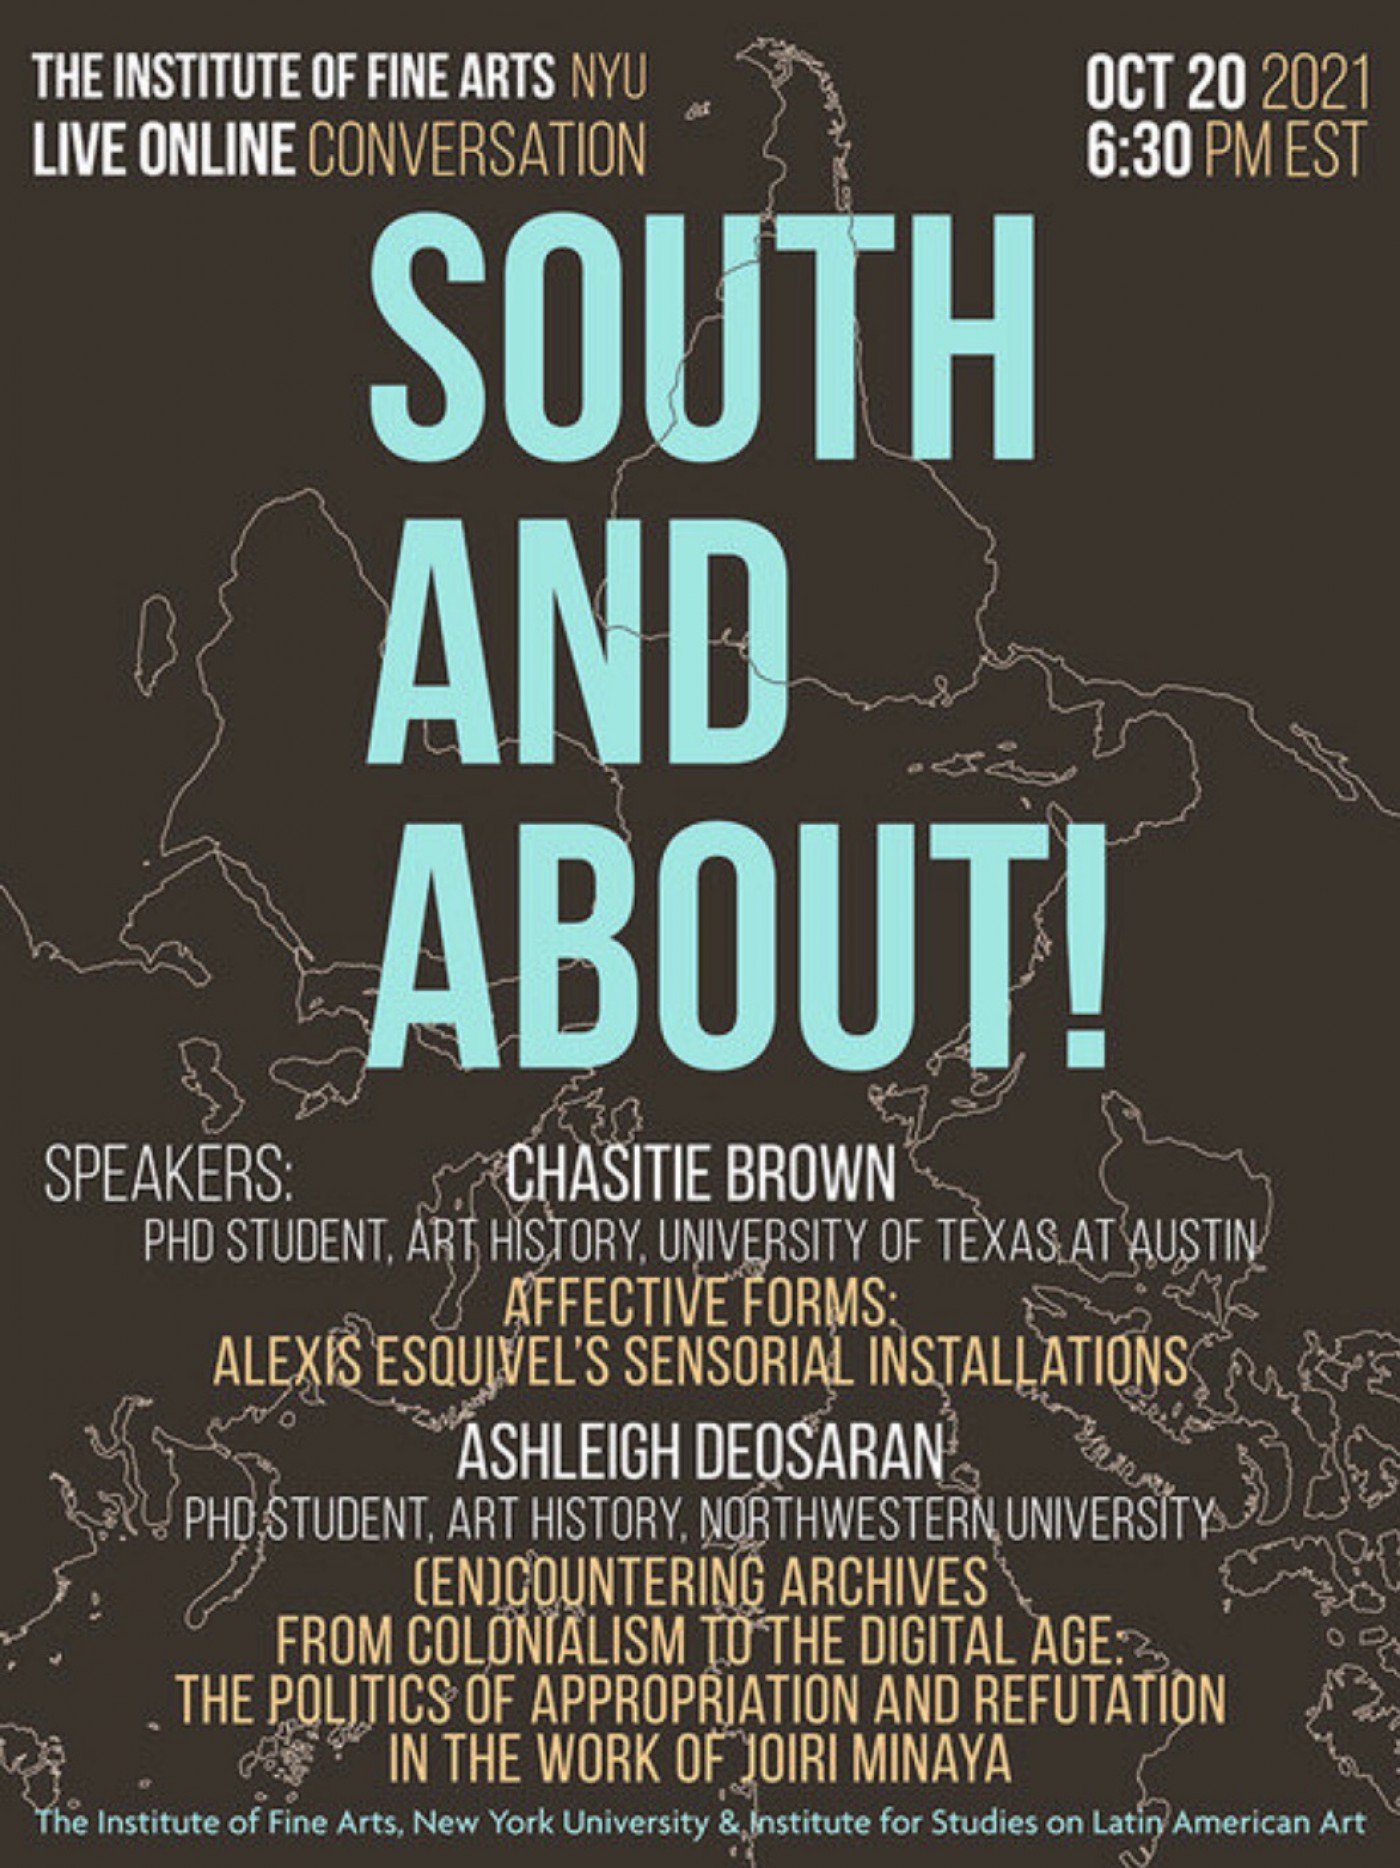 South and About event poster, Chasitie Brown and Ashleigh Deosaran, October 20, 2021